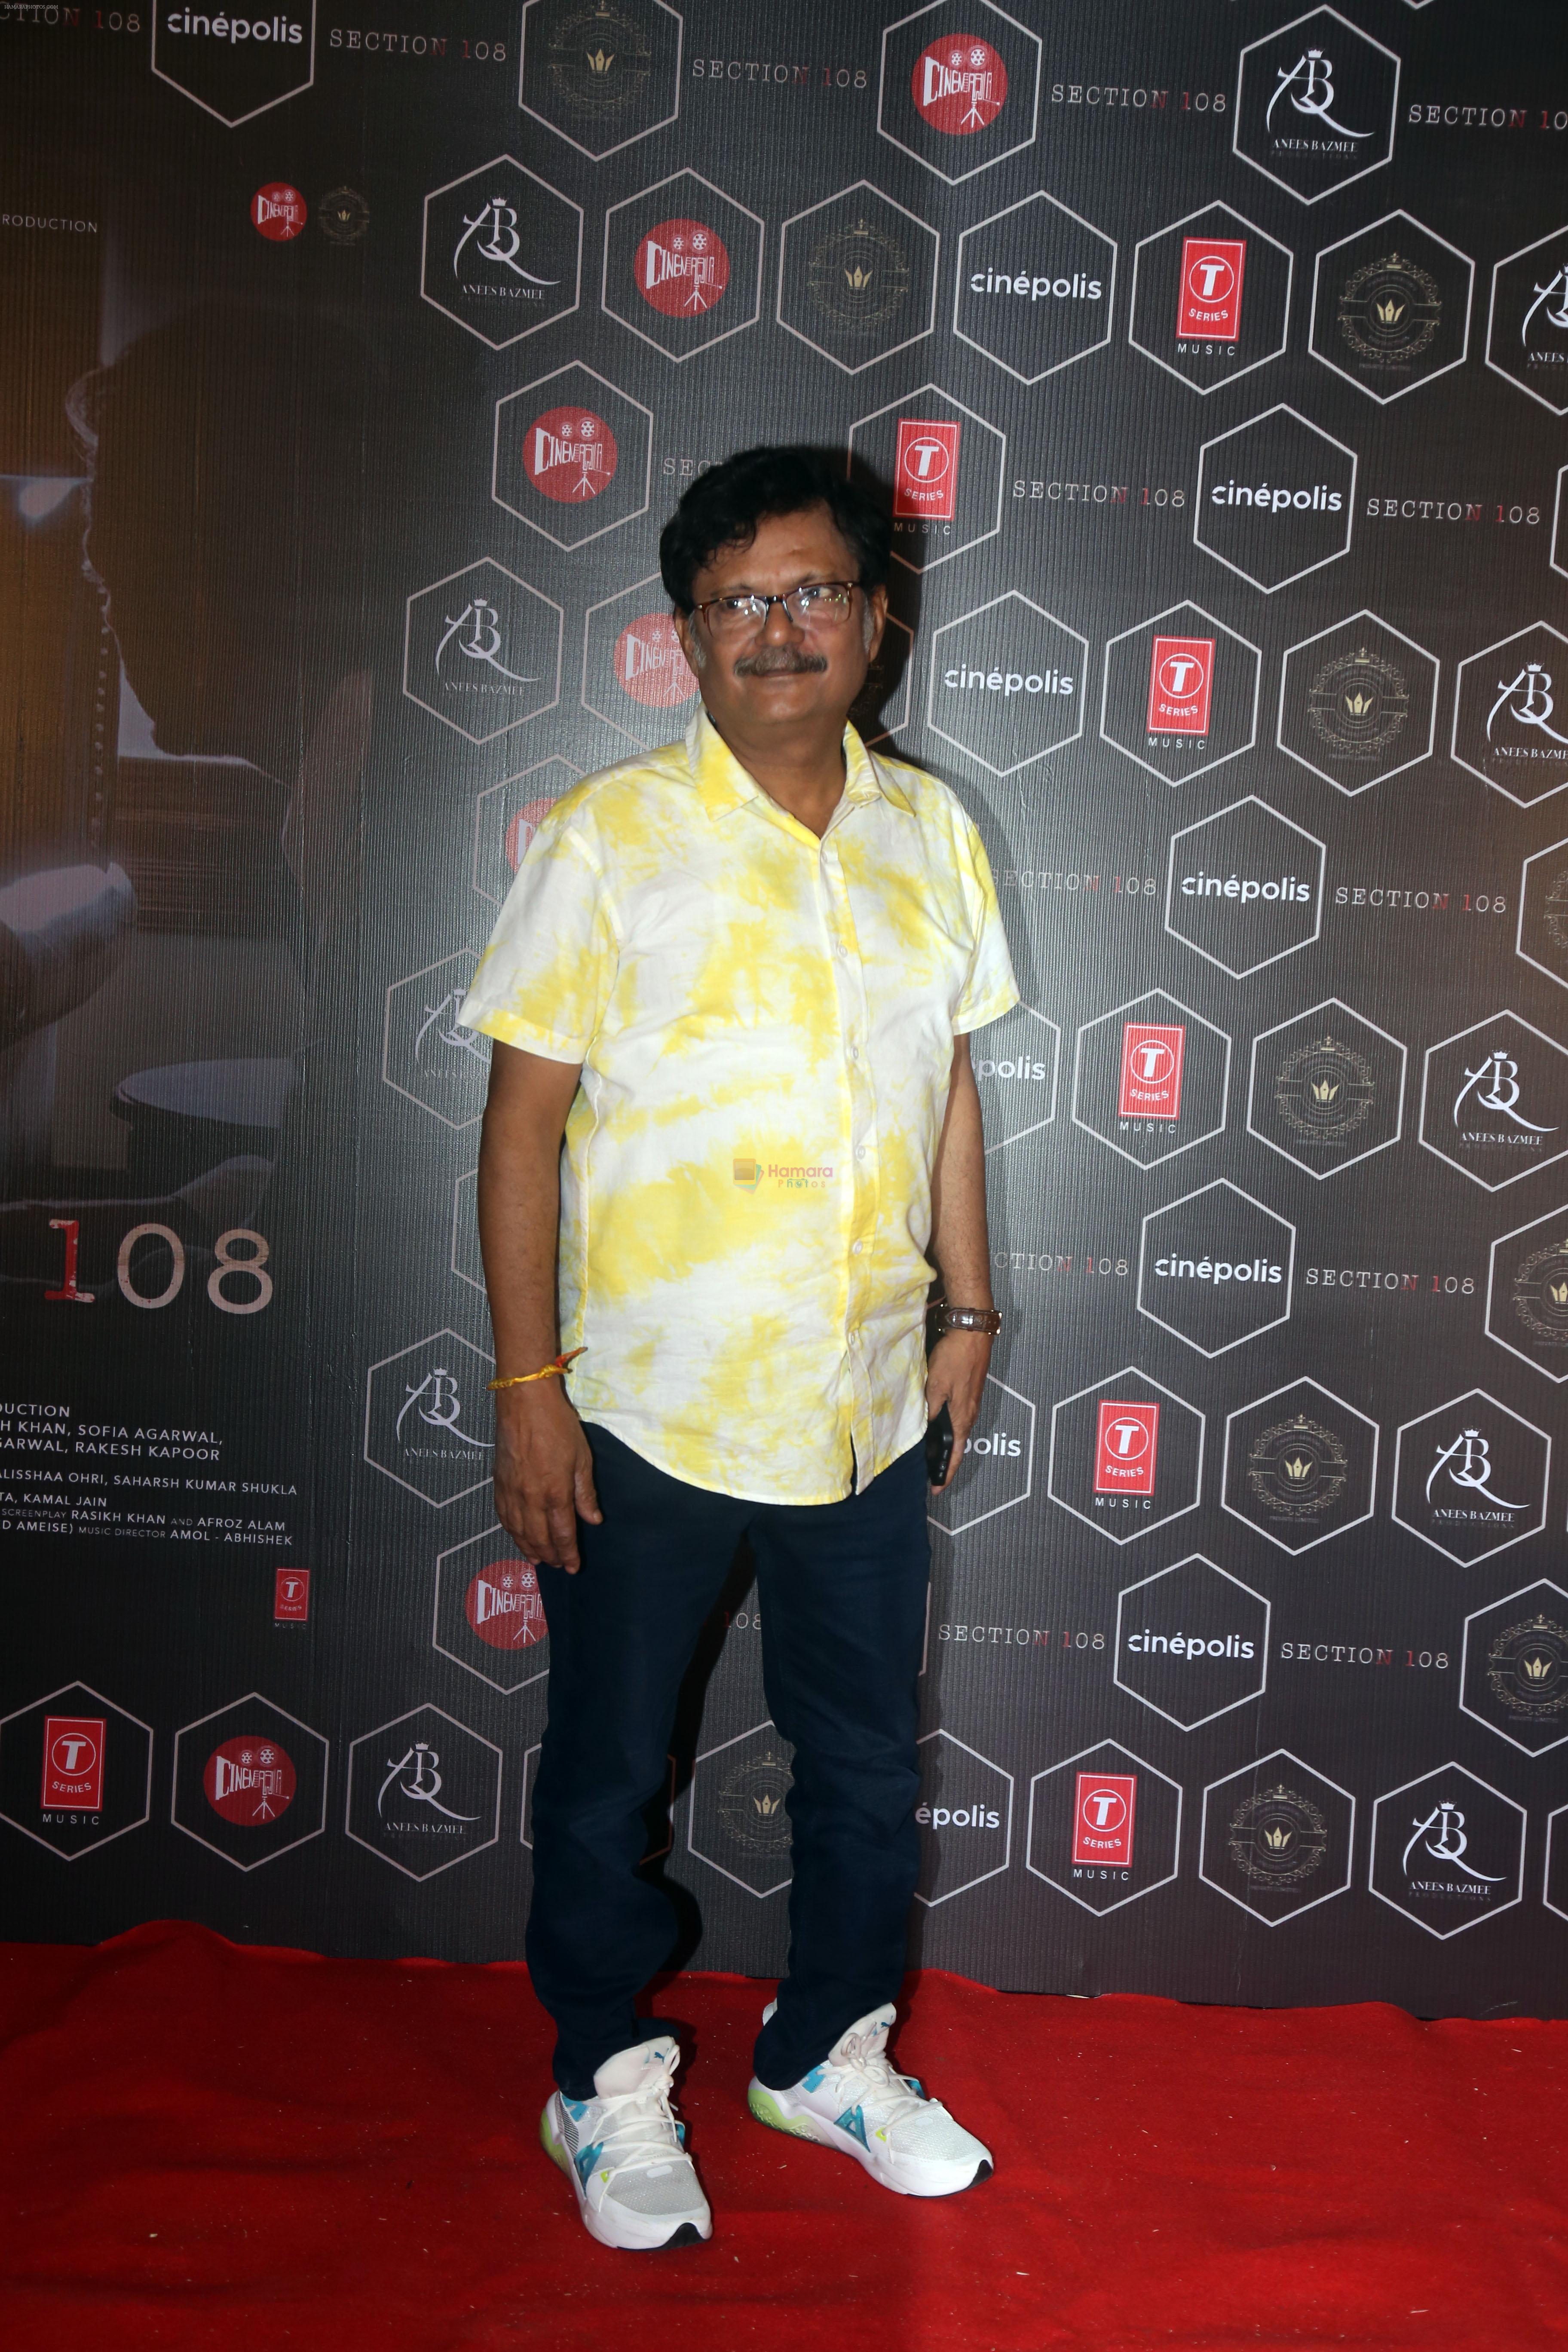 Atul Srivastava at the launch of film Section 108 Teaser on 27th August 2023